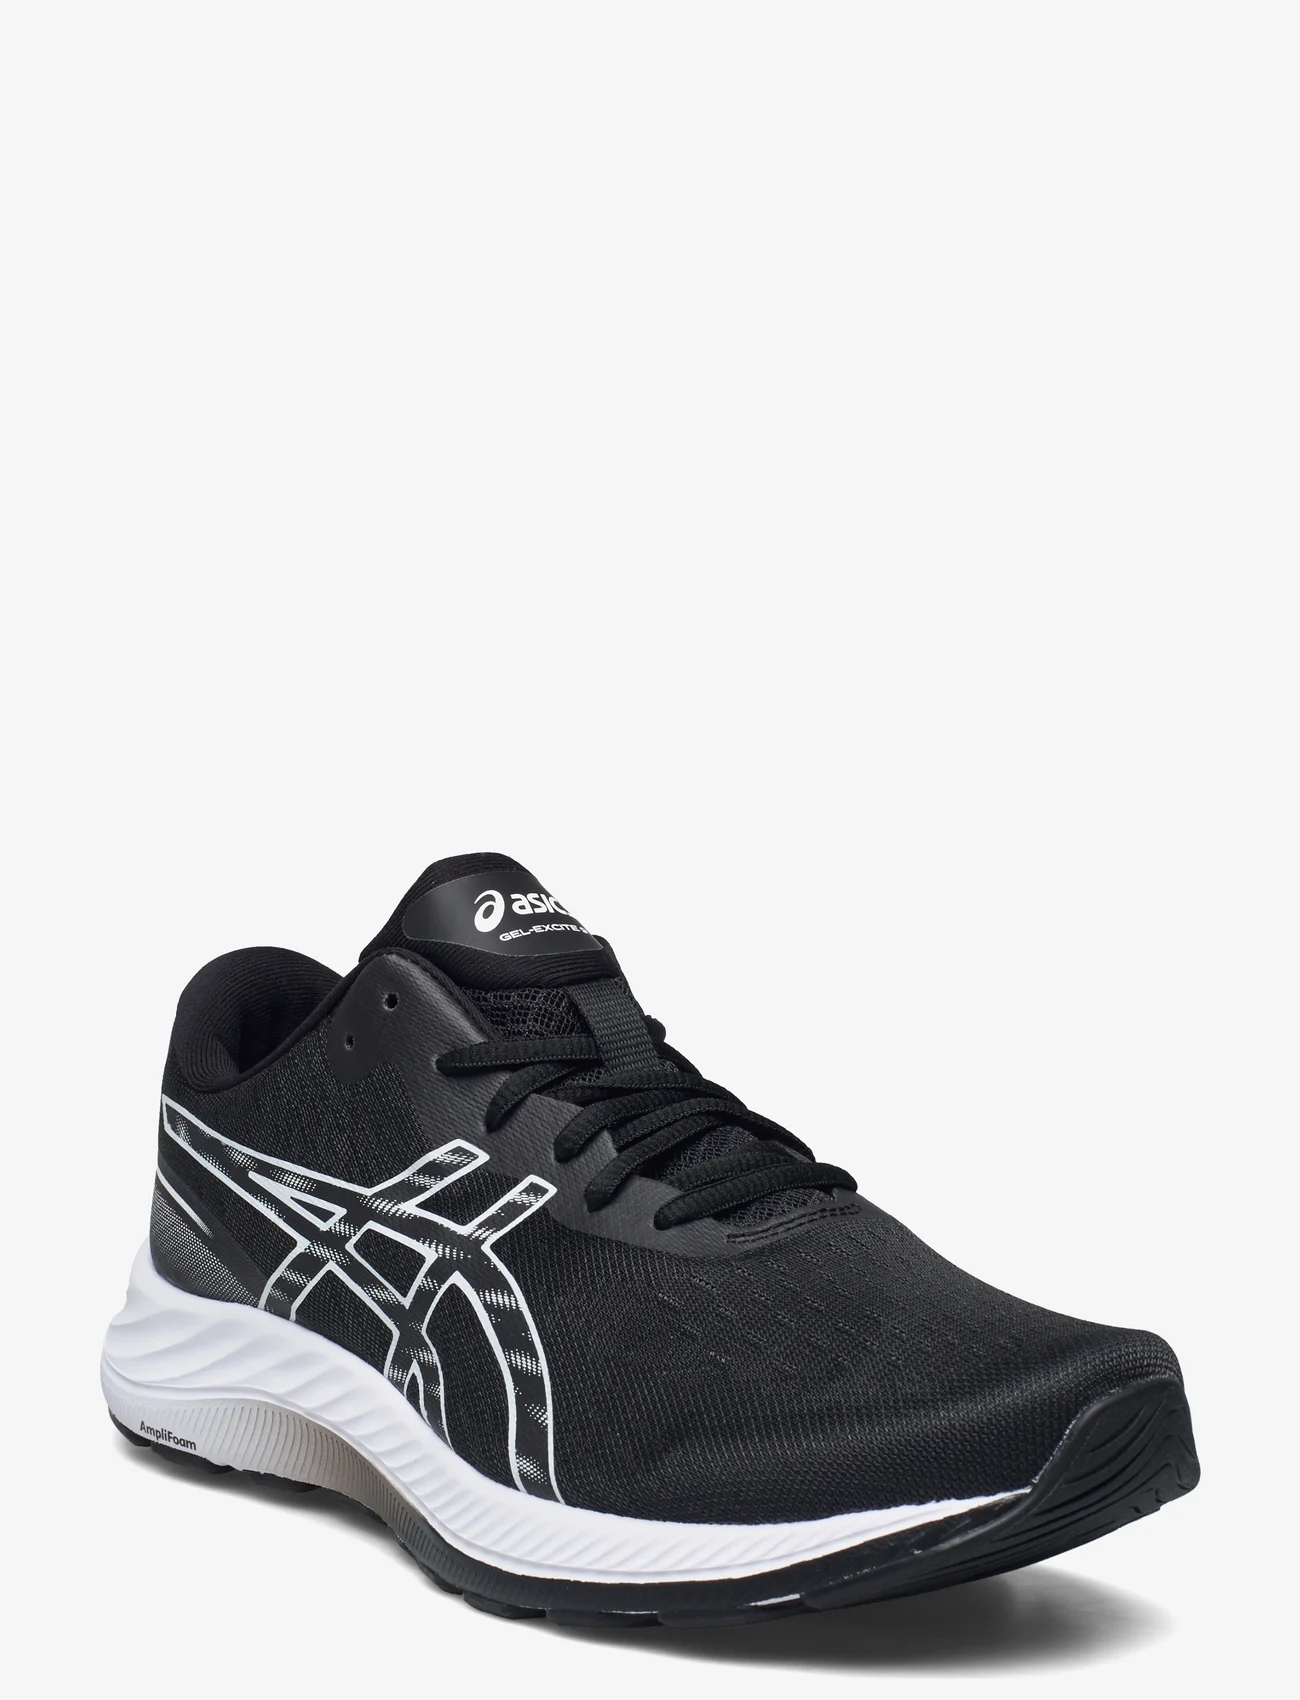 Asics Gel-excite 9 - Running shoes 